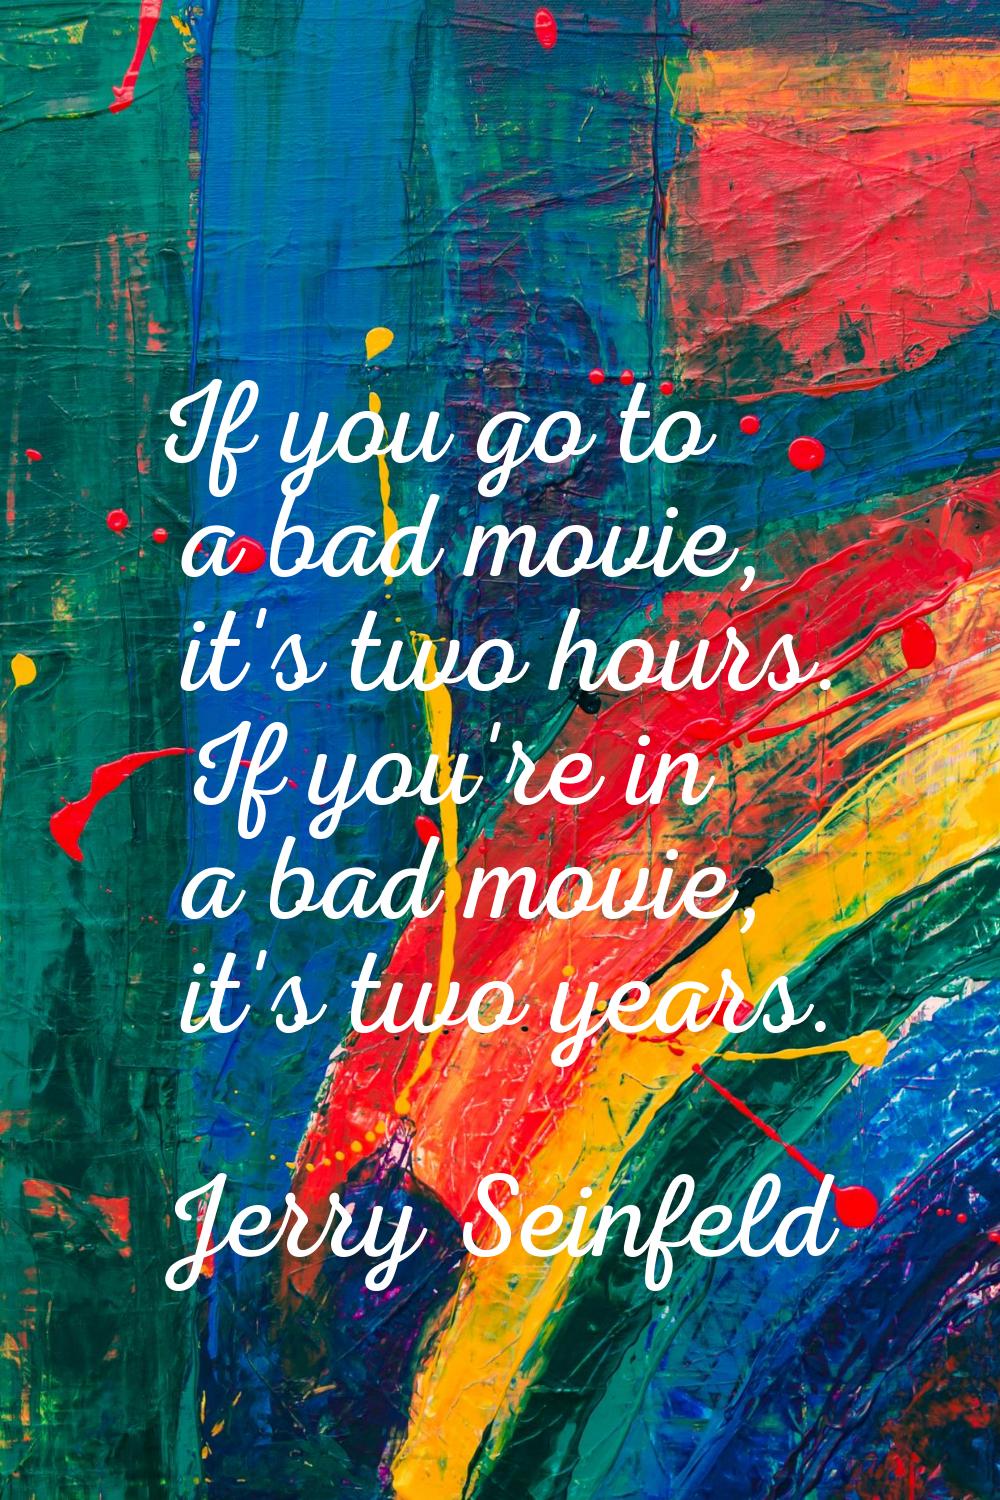 If you go to a bad movie, it's two hours. If you're in a bad movie, it's two years.